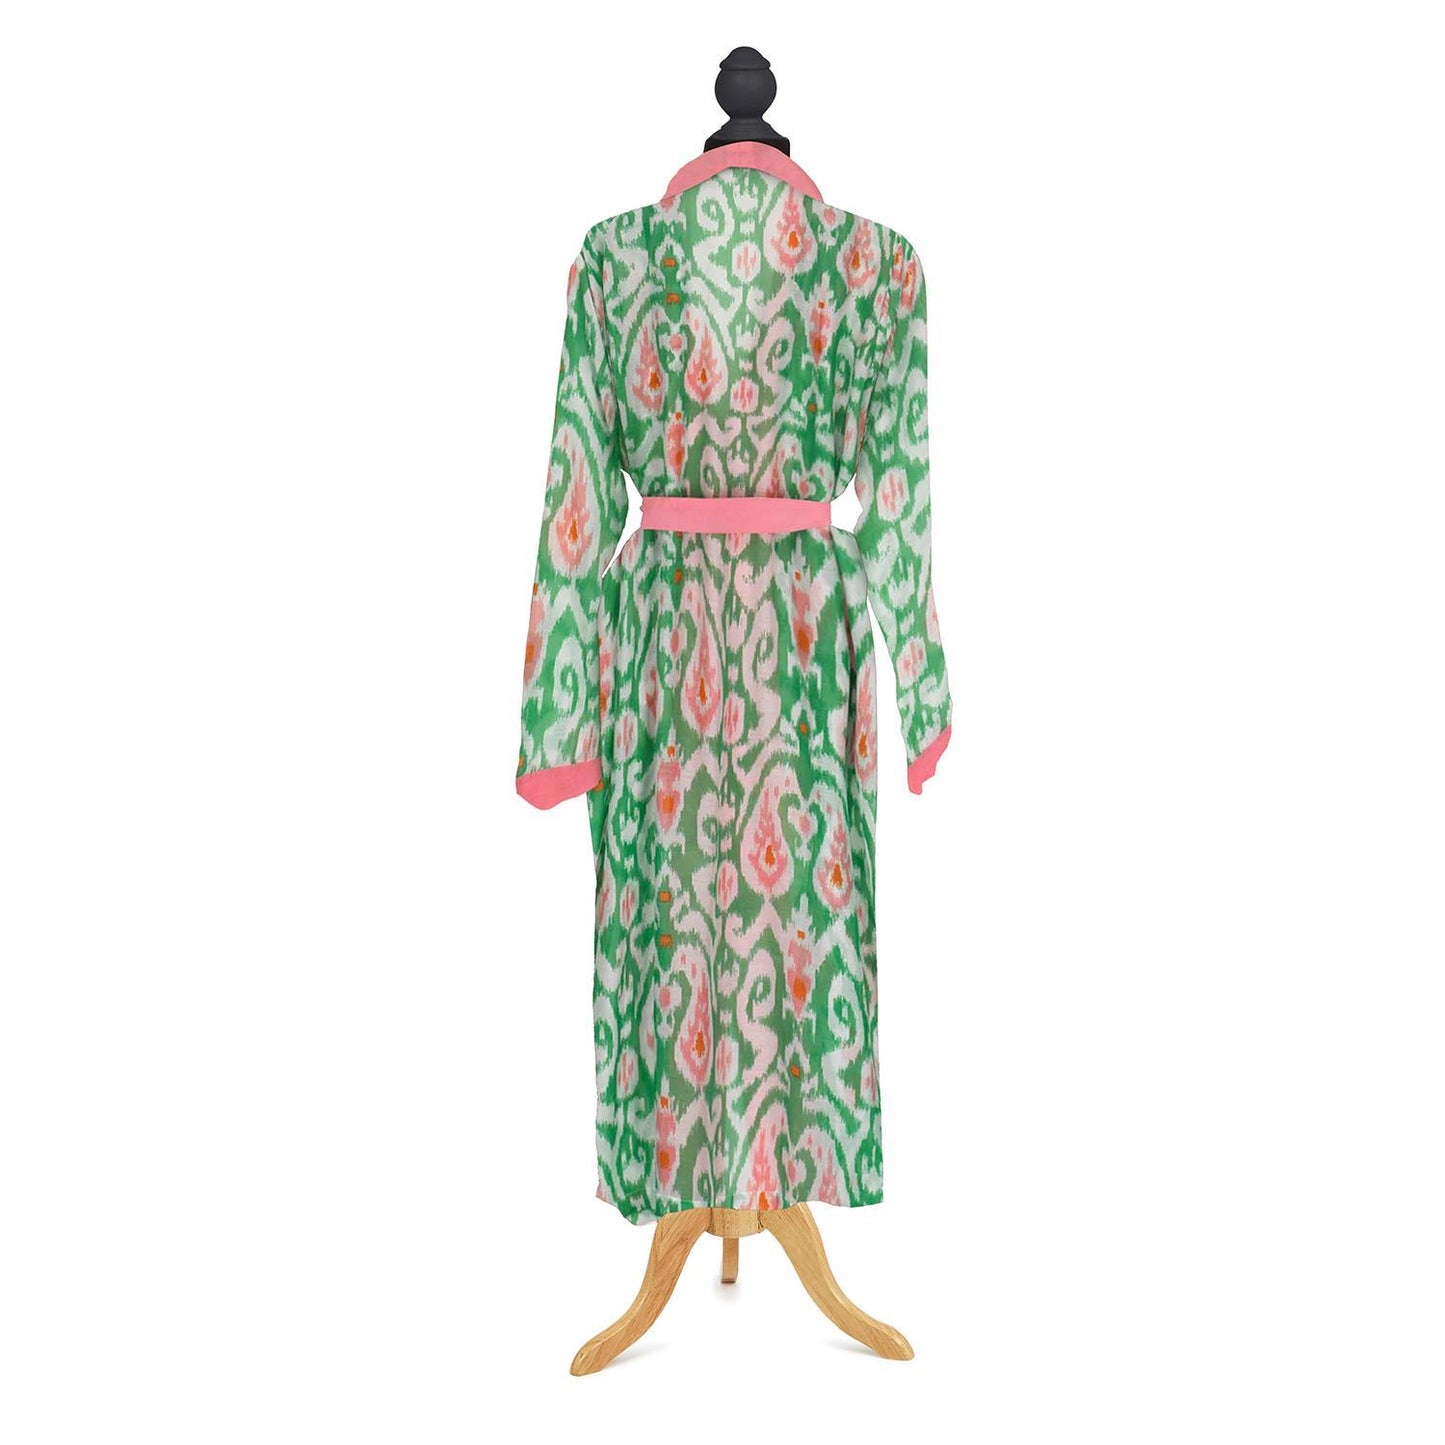 Robe- Ikat Green Gown